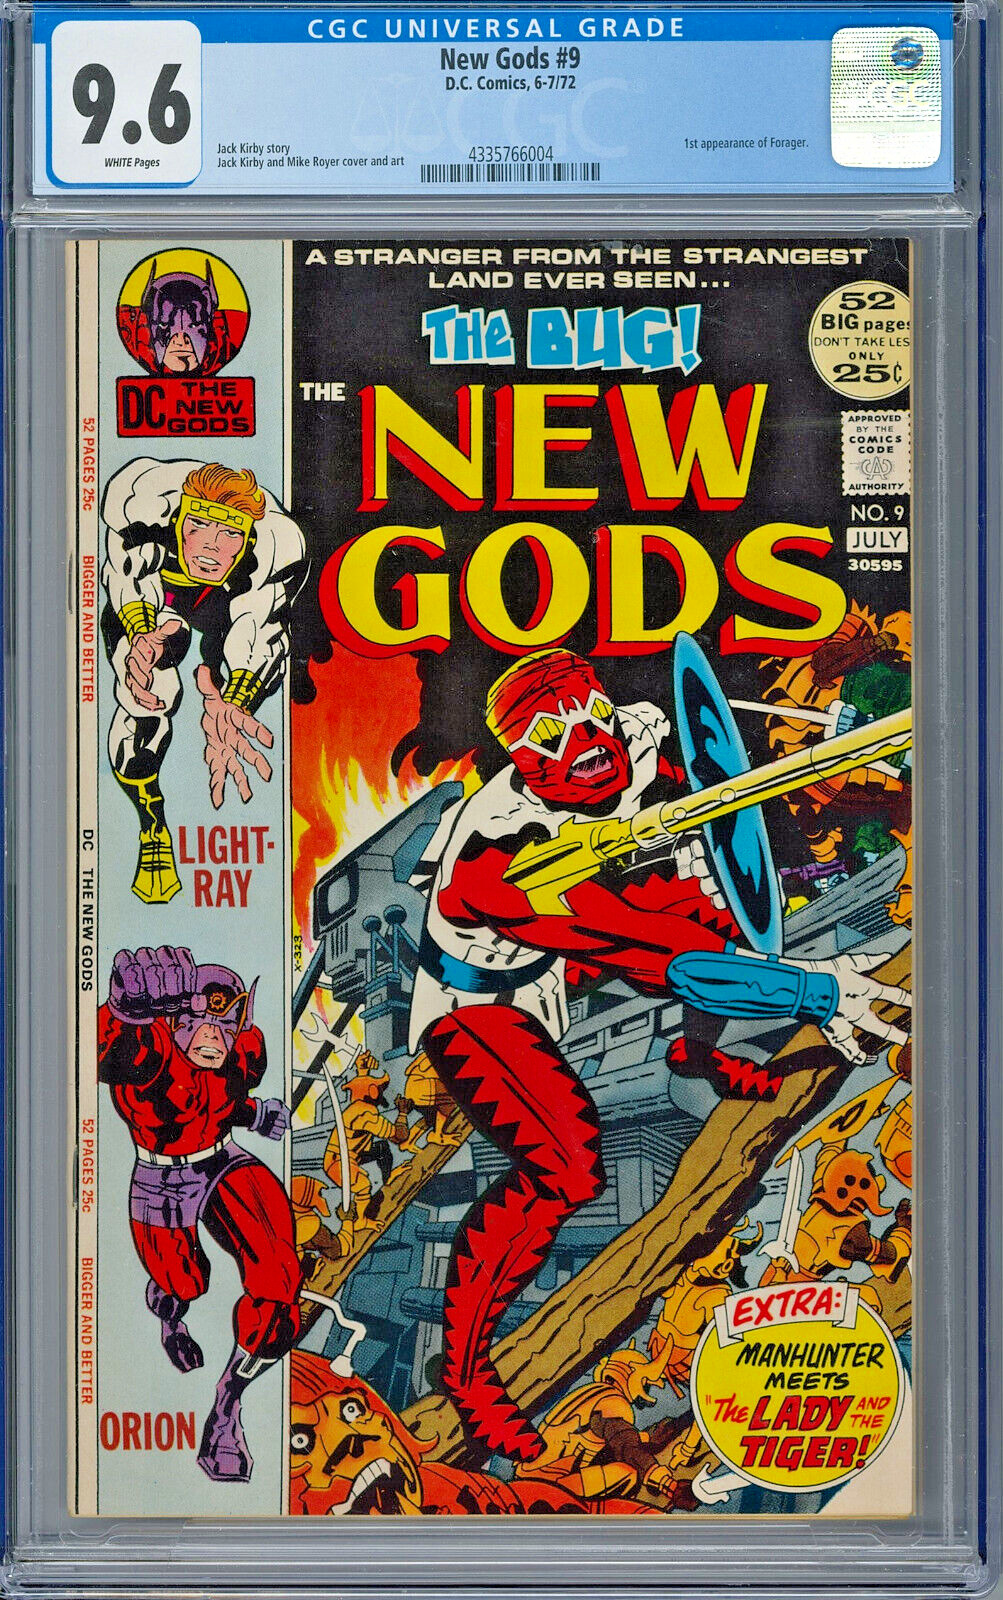 The New Gods #9 (1972) CGC 9.6 1st Forager Jack Kirby Graded DC Comics